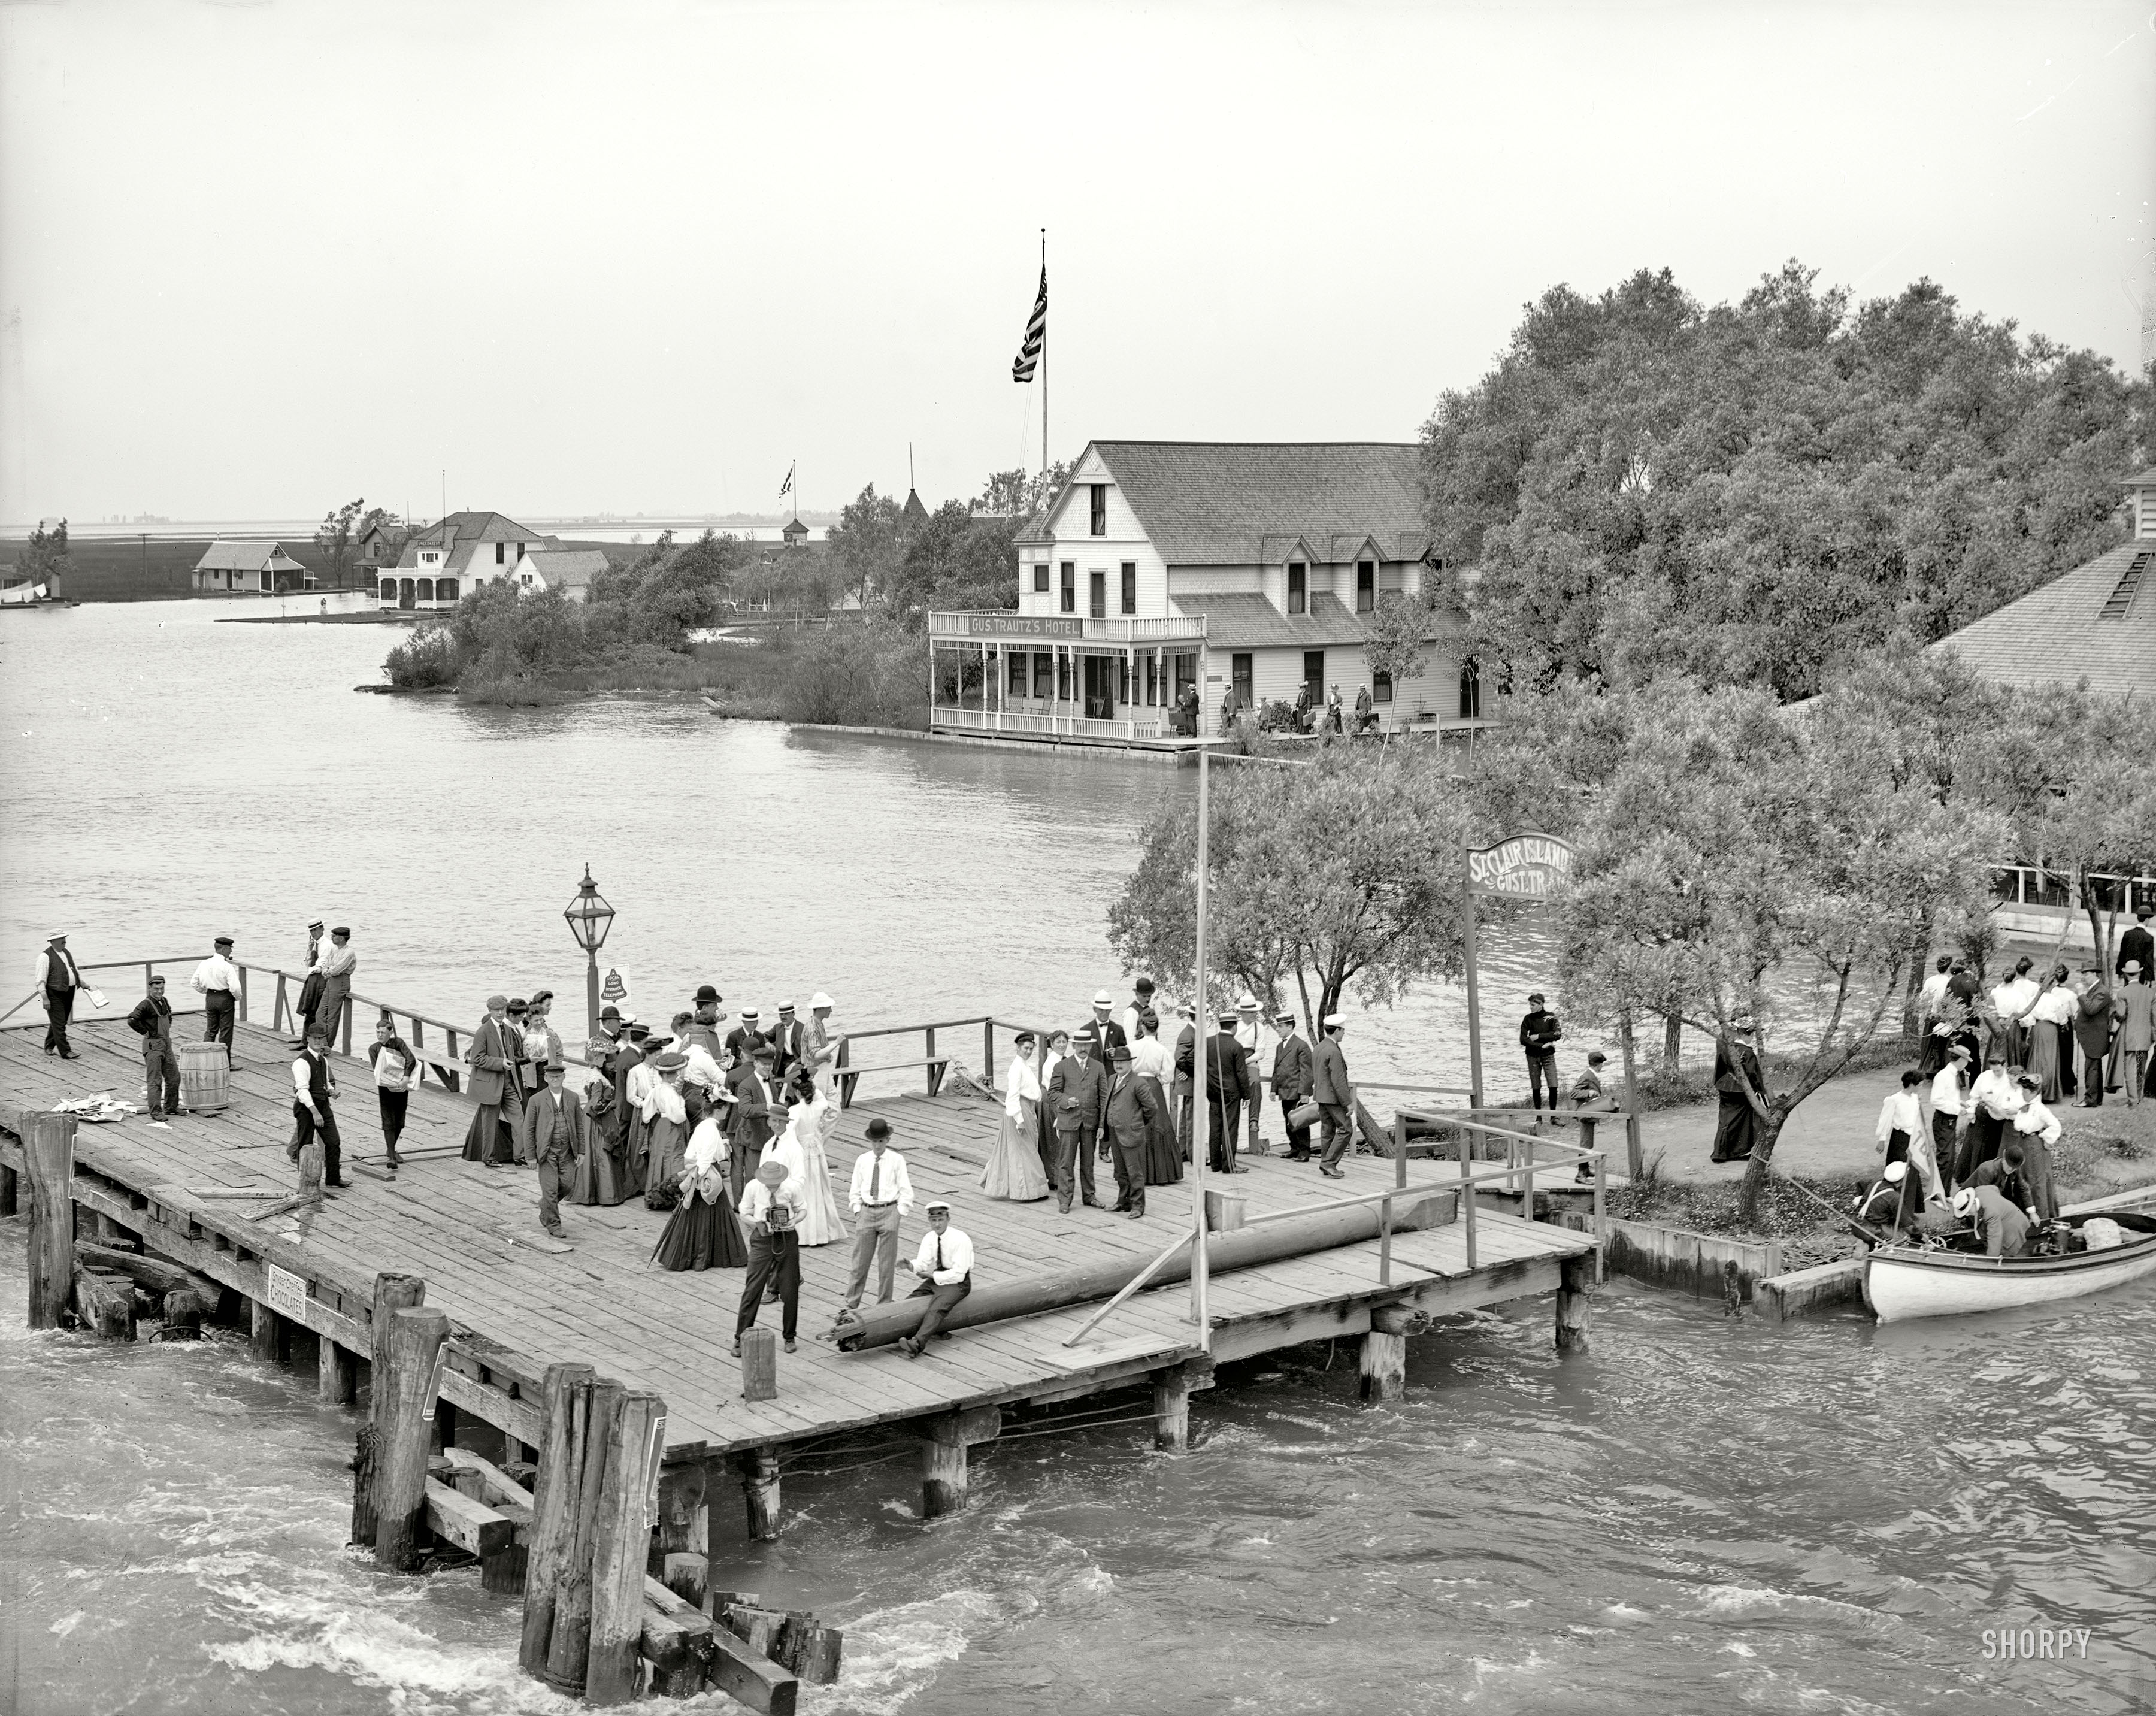 St. Clair Flats, Michigan, circa 1905. "Resort sightseers on dock of Gus. Trautz's Hotel." 8x10 glass negative, Detroit Publishing Company. View full size.